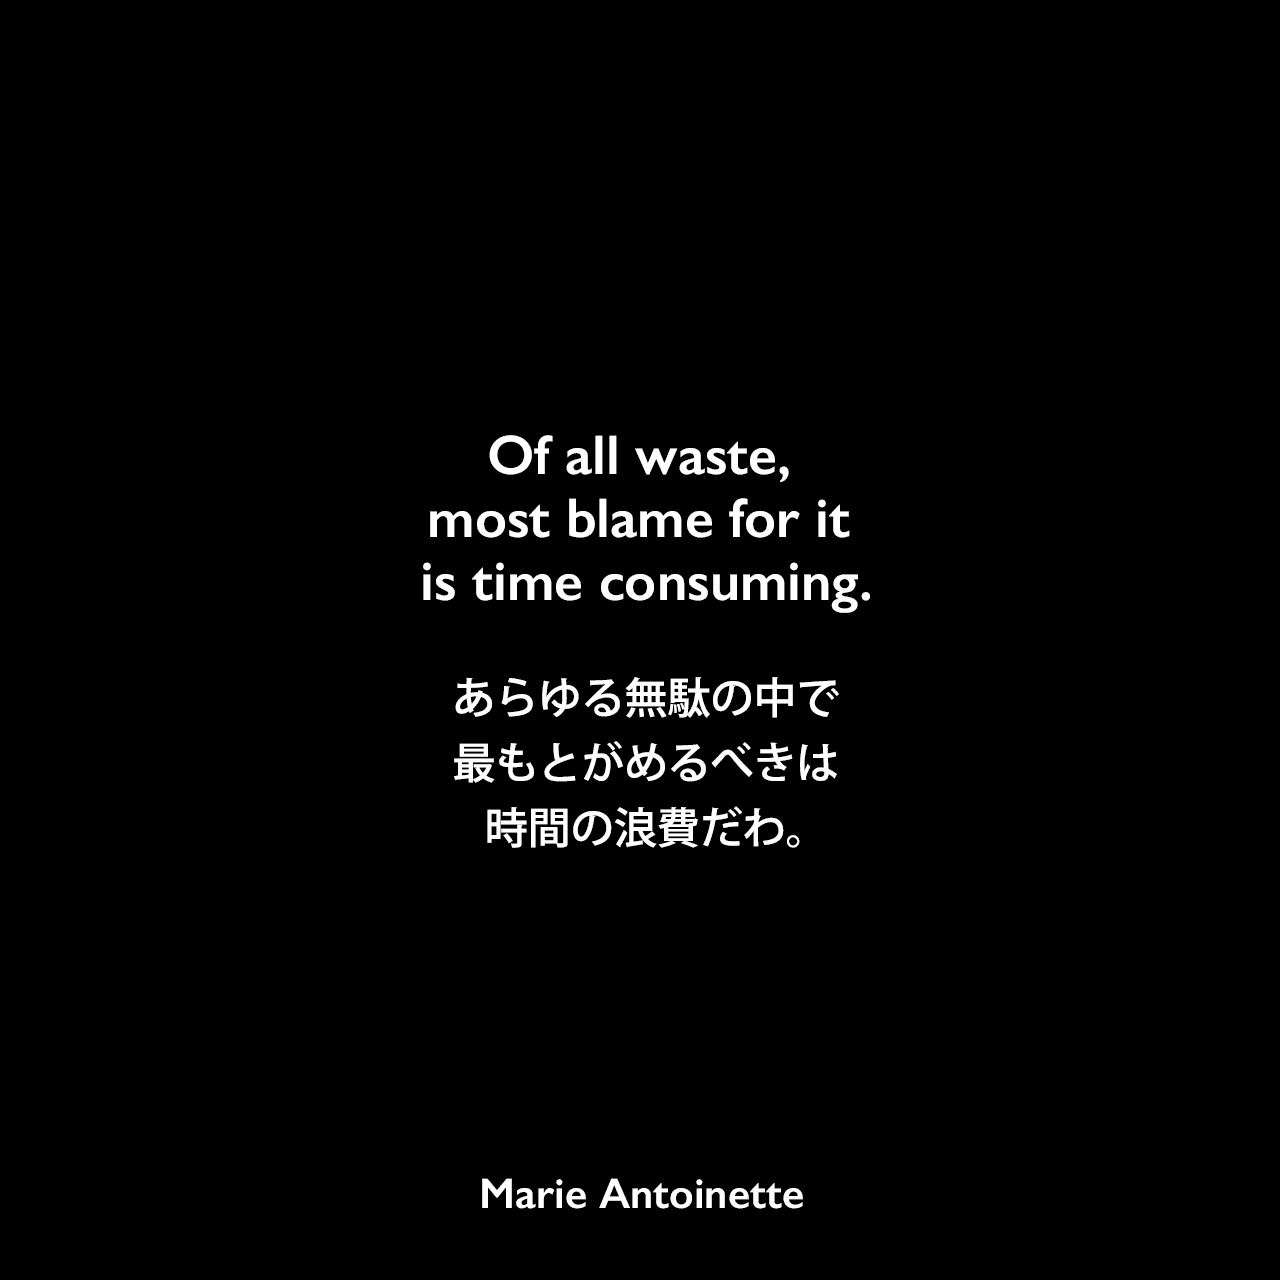 Of all waste, most blame for it is time consuming.あらゆる無駄の中で、最もとがめるべきは時間の浪費だわ。Marie Antoinette